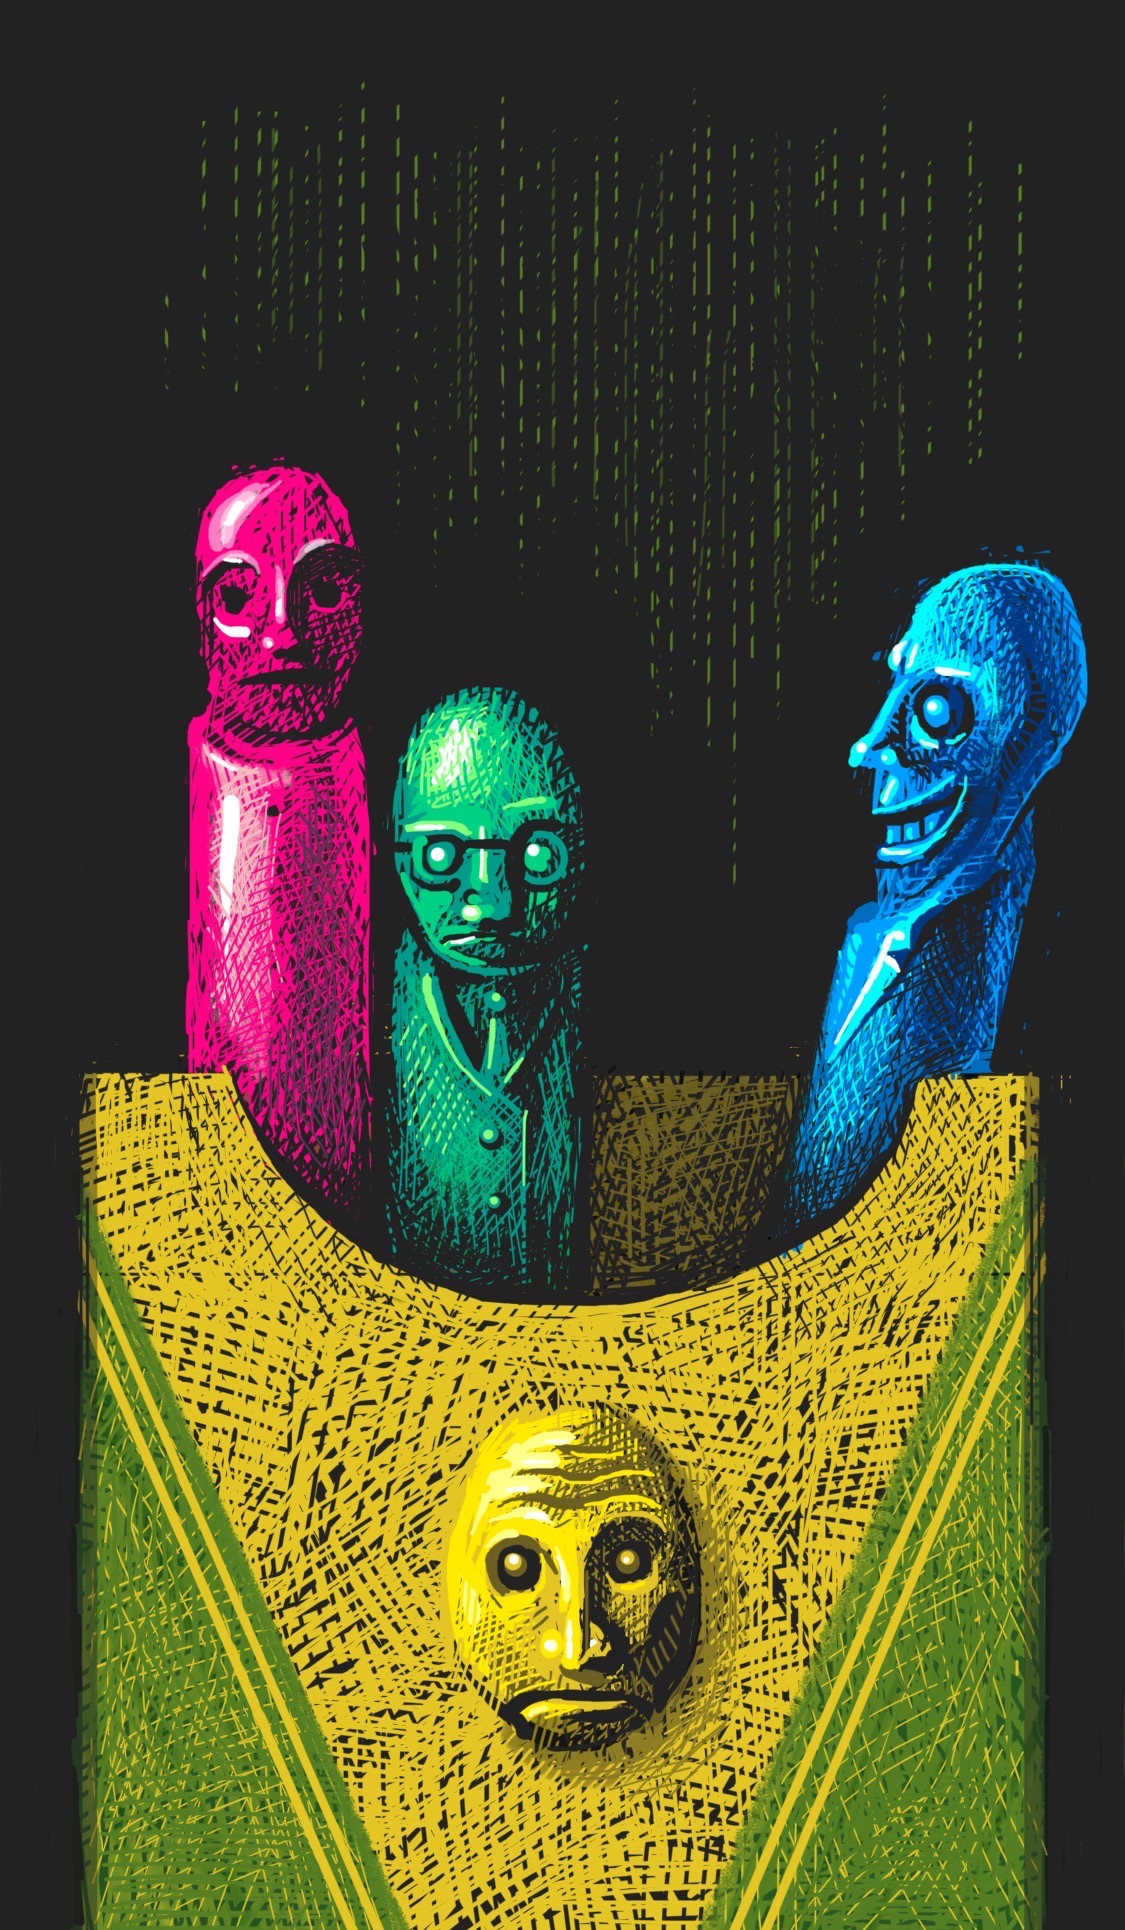 A box of anthropomorphized crayons, where one of them looks kind of creepy and the other two are not having it at ALL